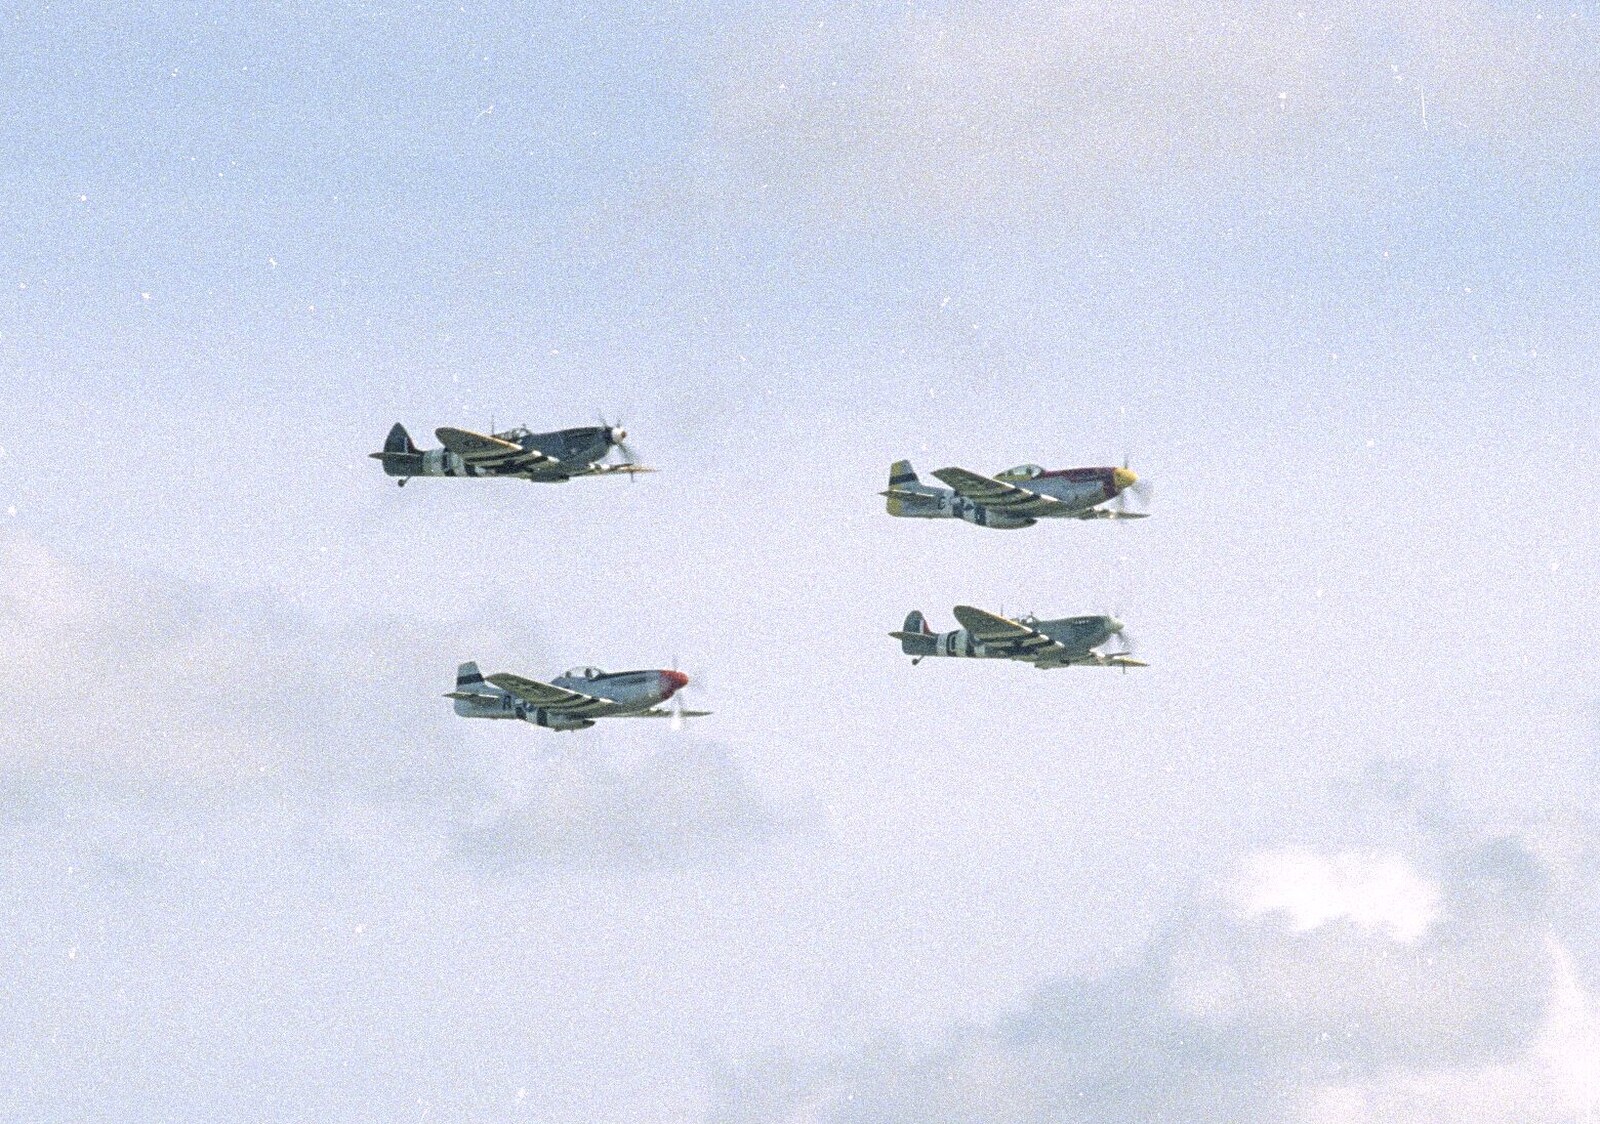 Mustangs and Spitfires from The Mildenhall Air Fete, Mildenhall, Suffolk - 29th May 1994